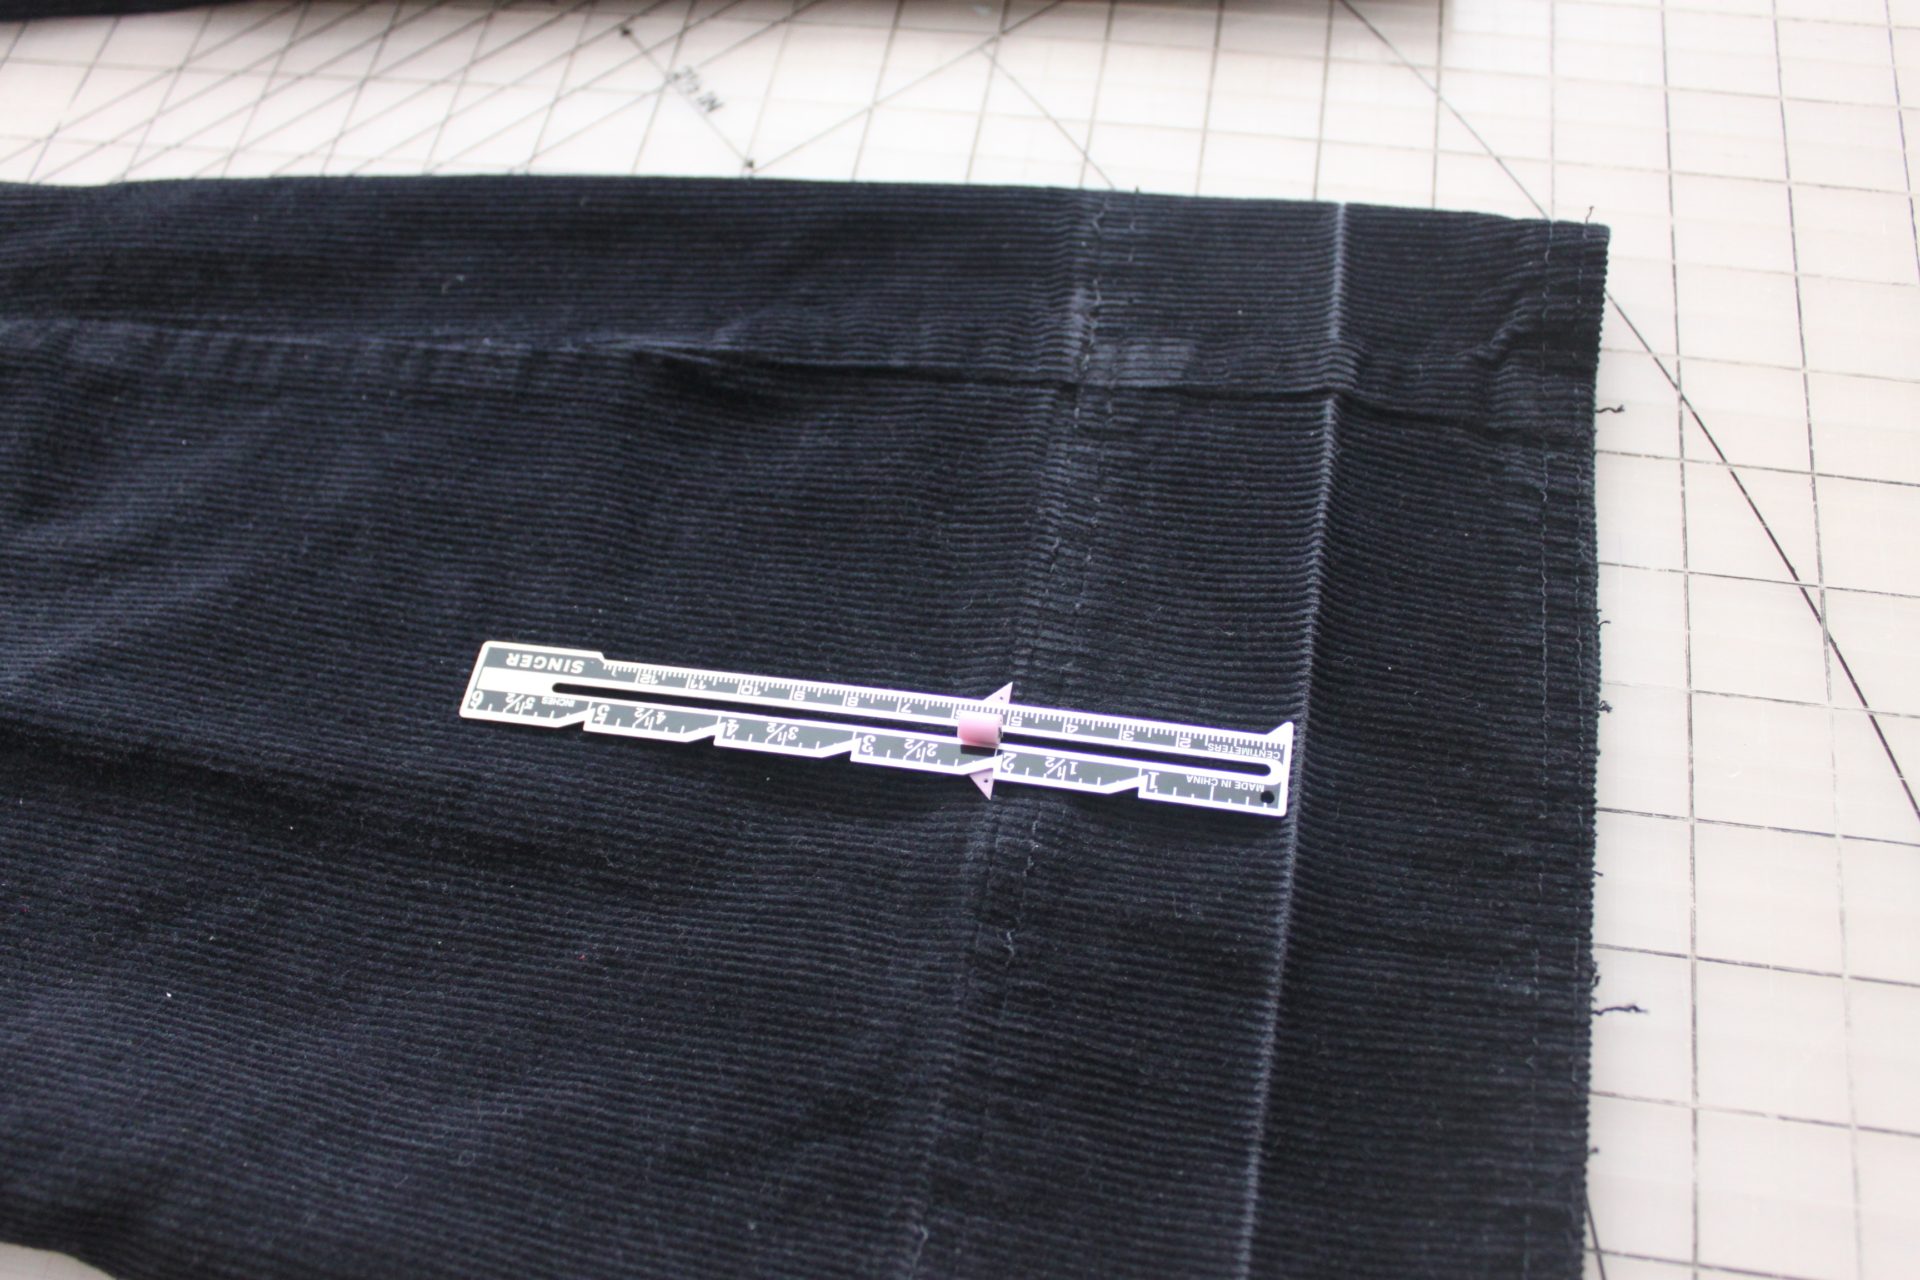 Sewing Basics: How to Hem Pants - Artisan in the Woods